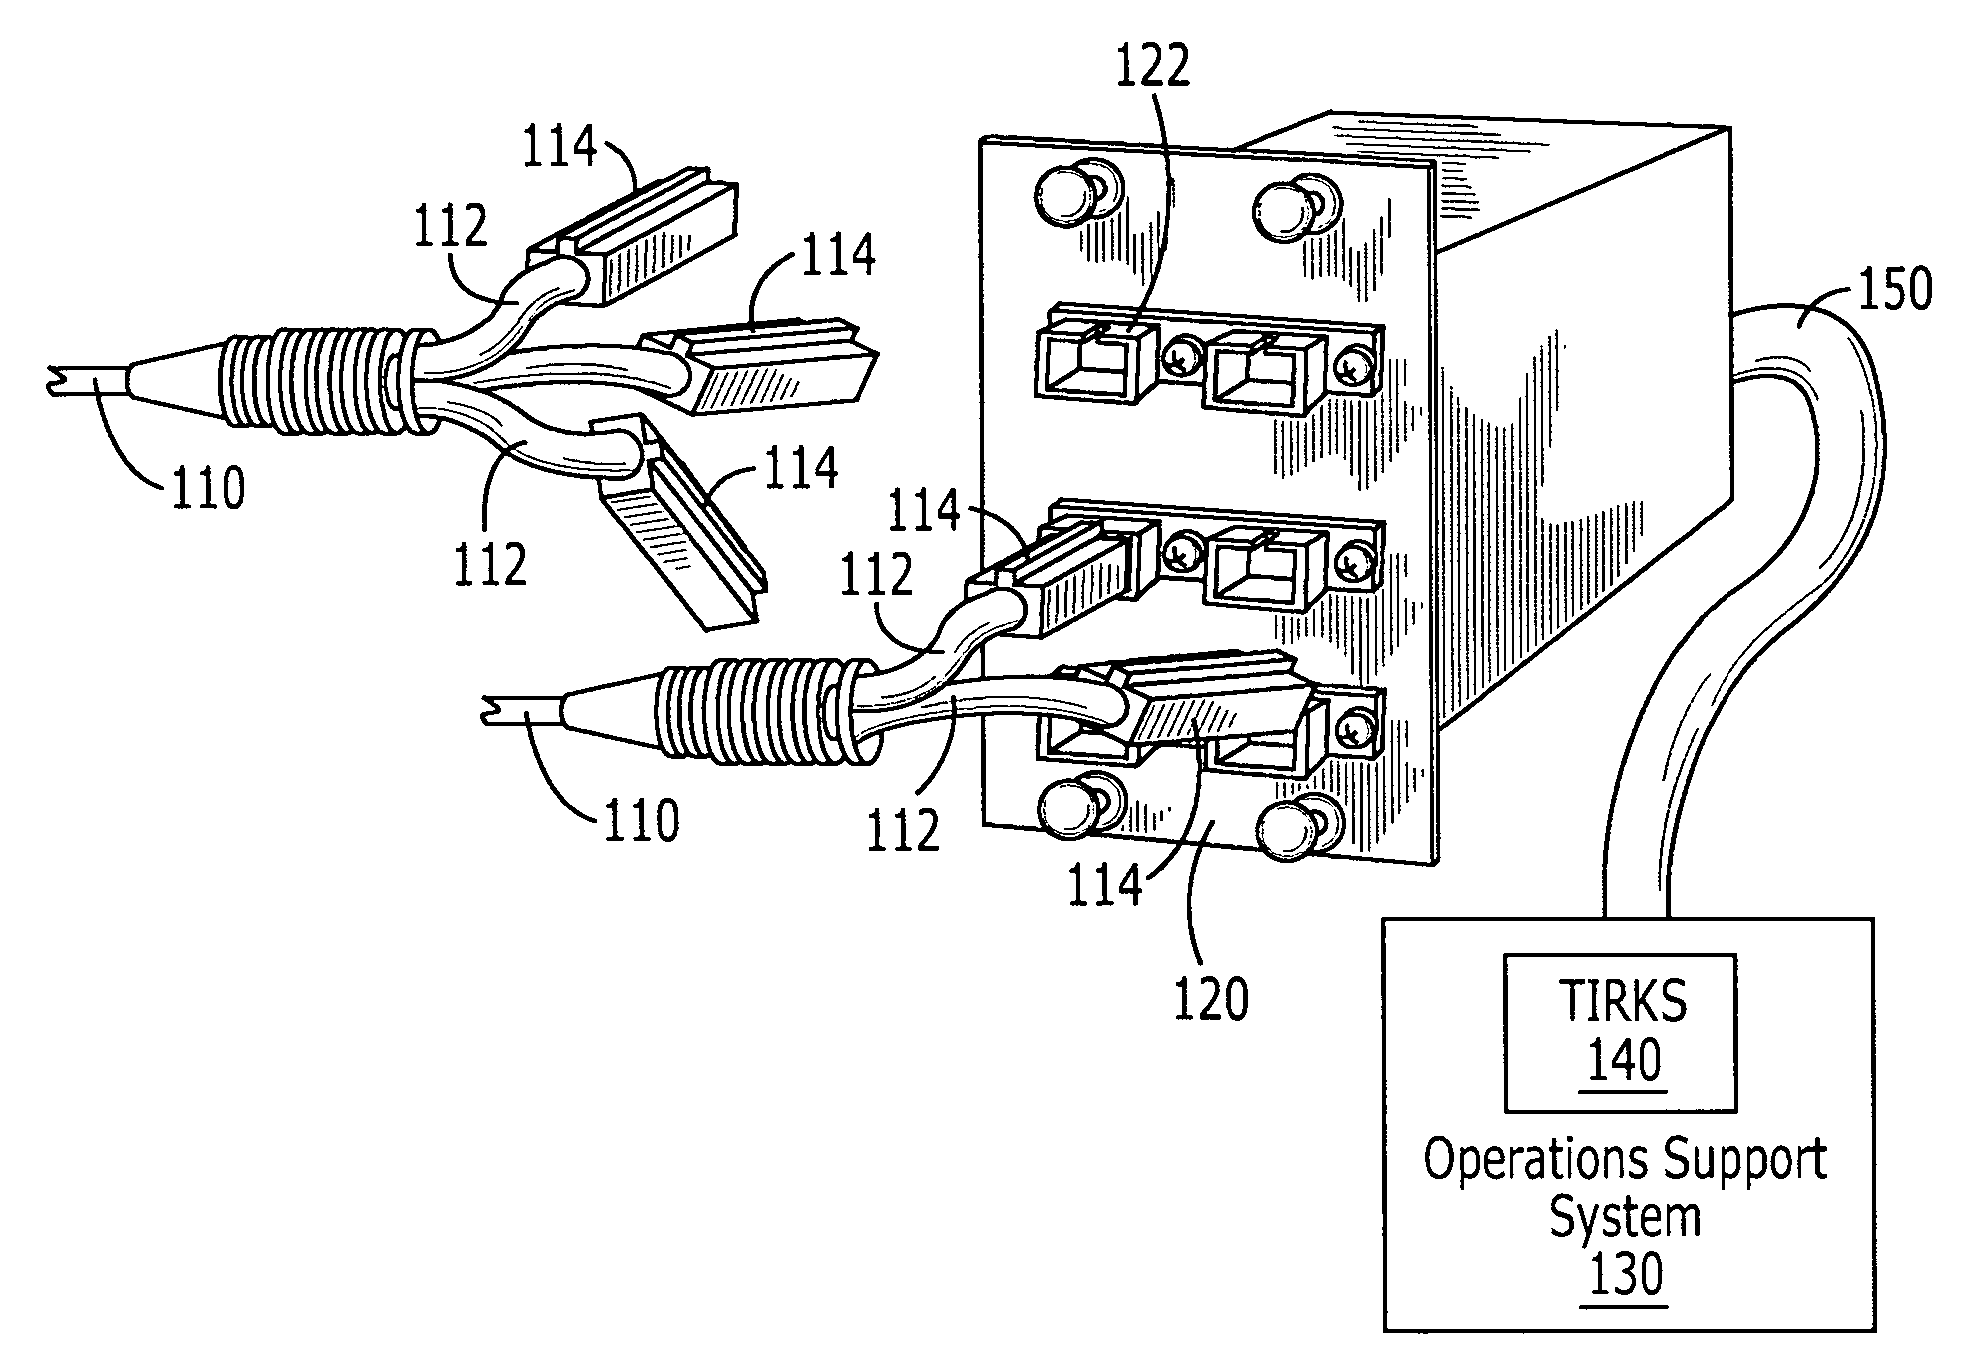 Optical fiber connectors with identification circuits and distribution terminals that communicate therewith